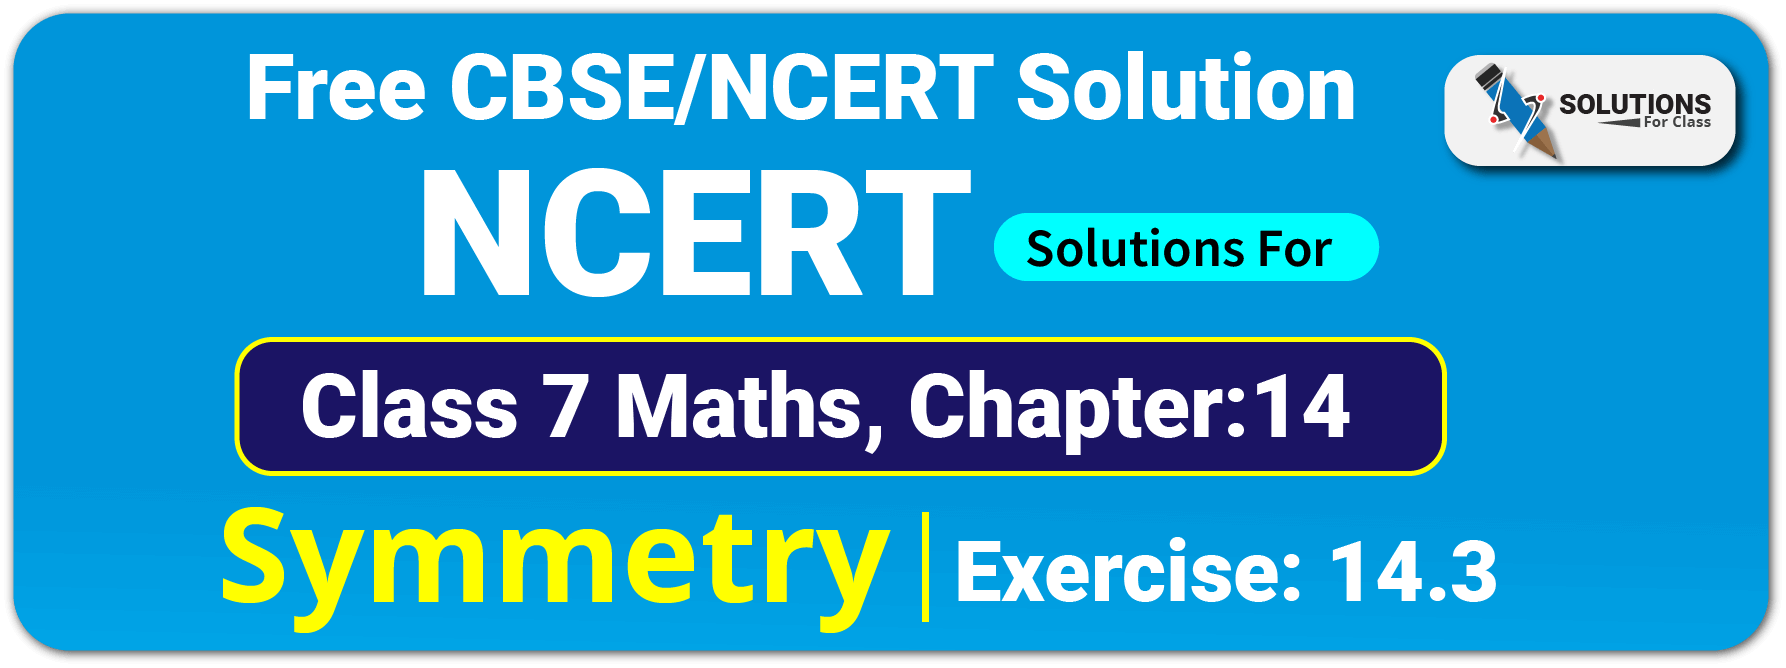 NCERT Solutions For Class 7 Maths Chapter 14 Symmetry Exercise 14.3